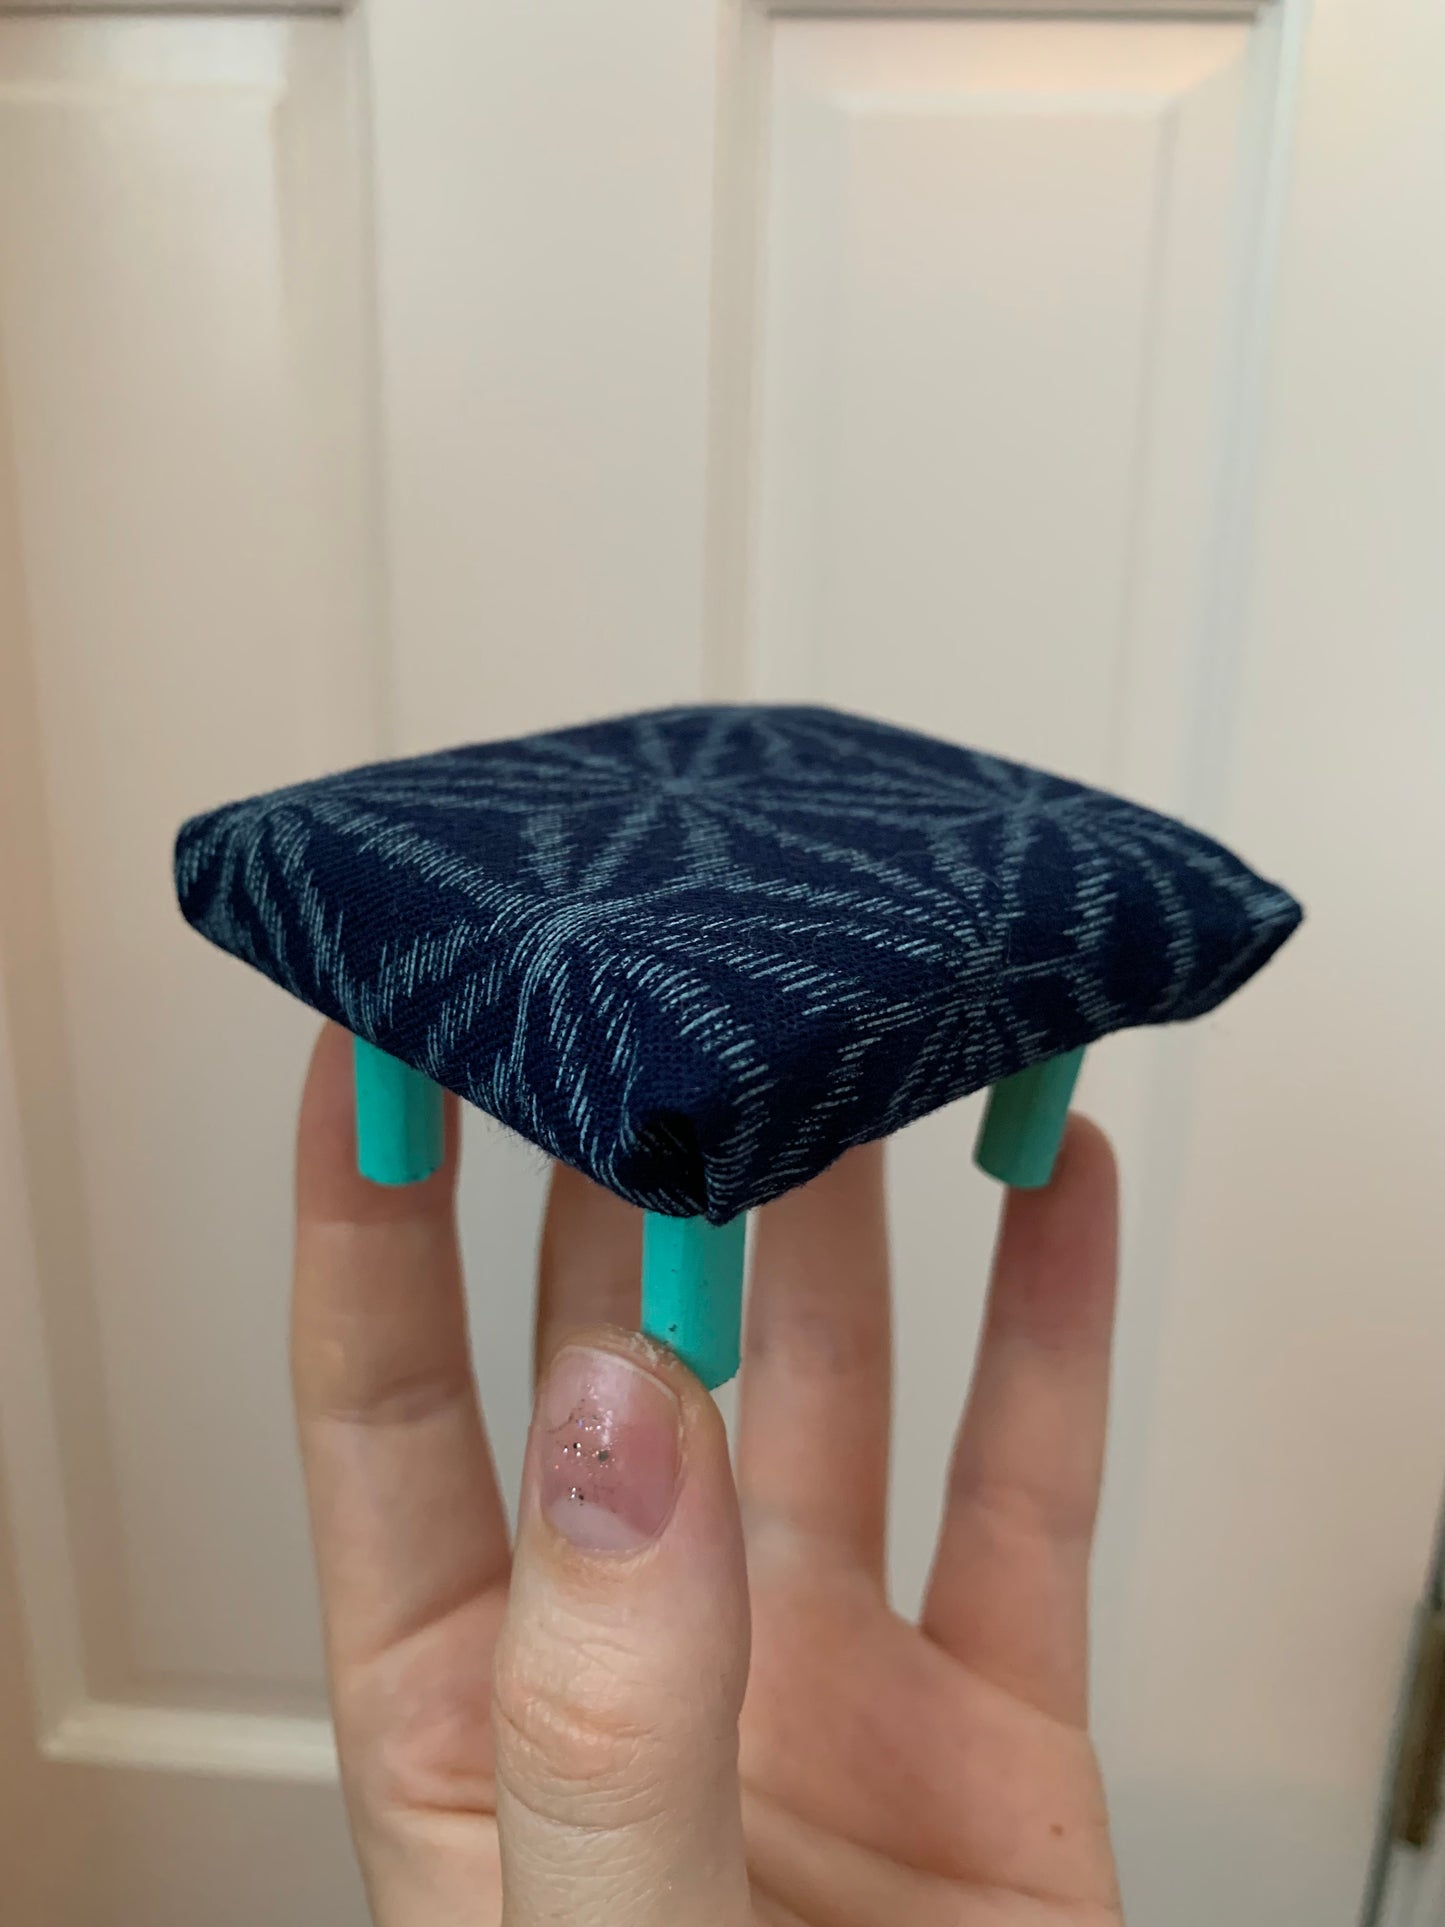 a miniature dollhouse ottoman, held in a hand for scale. This one is navy with a geometric design and turquoise legs